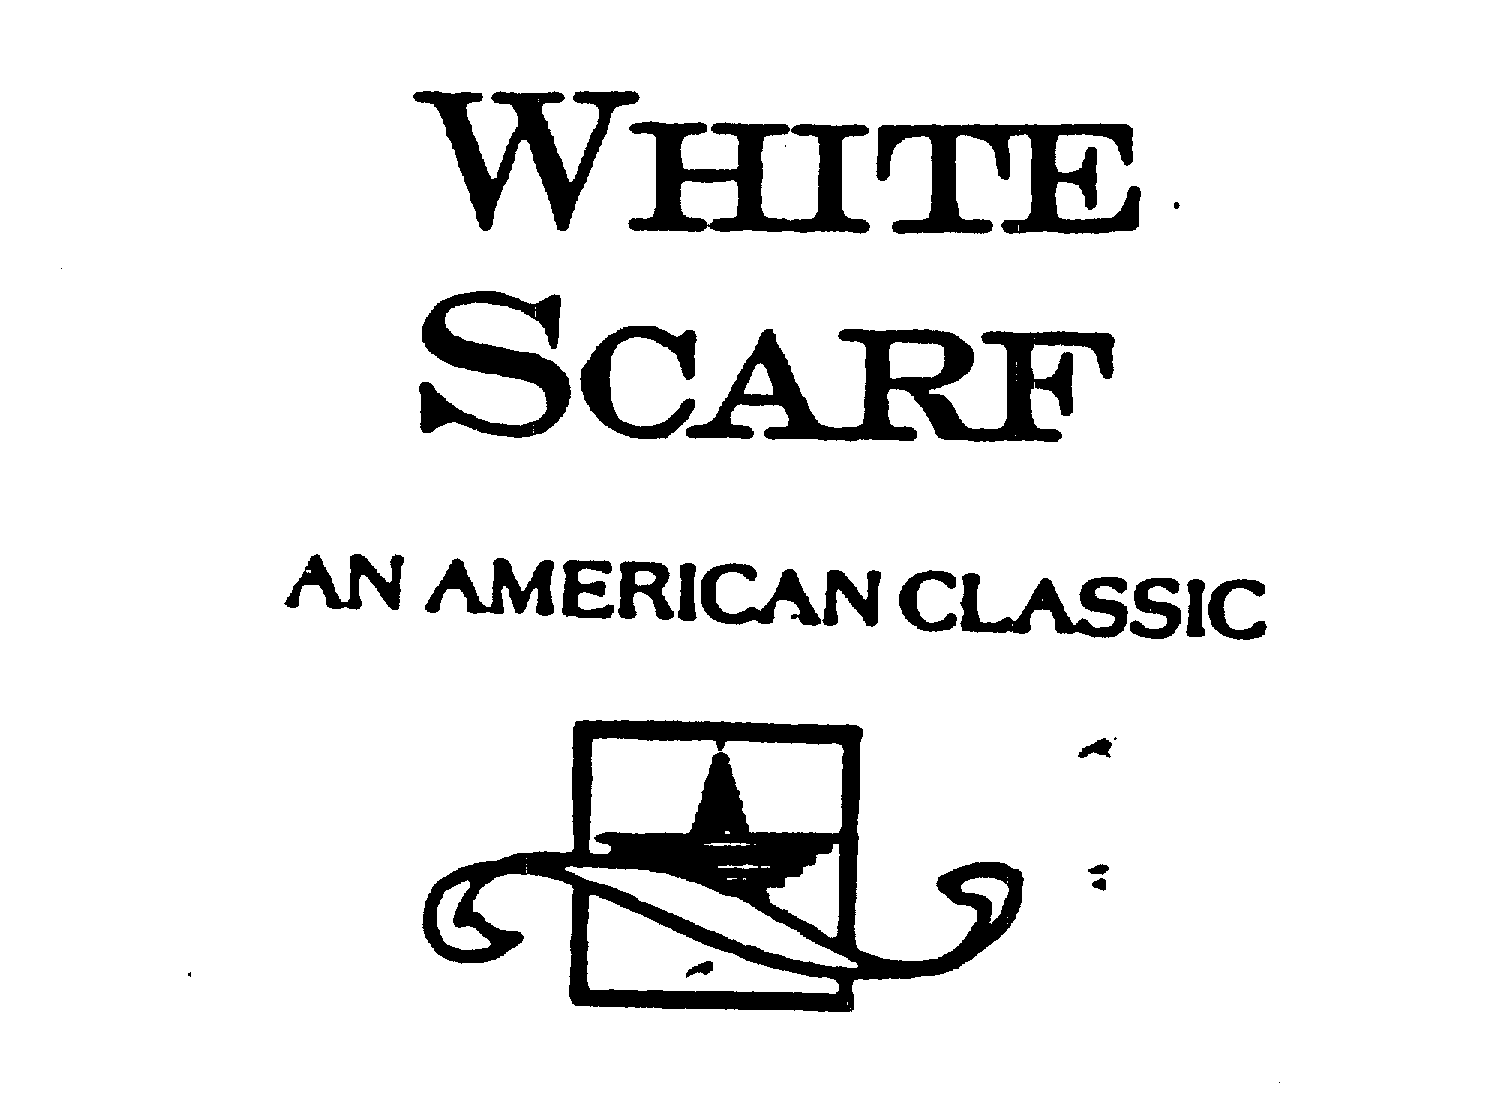  WHITE SCARF AN AMERICAN CLASSIC